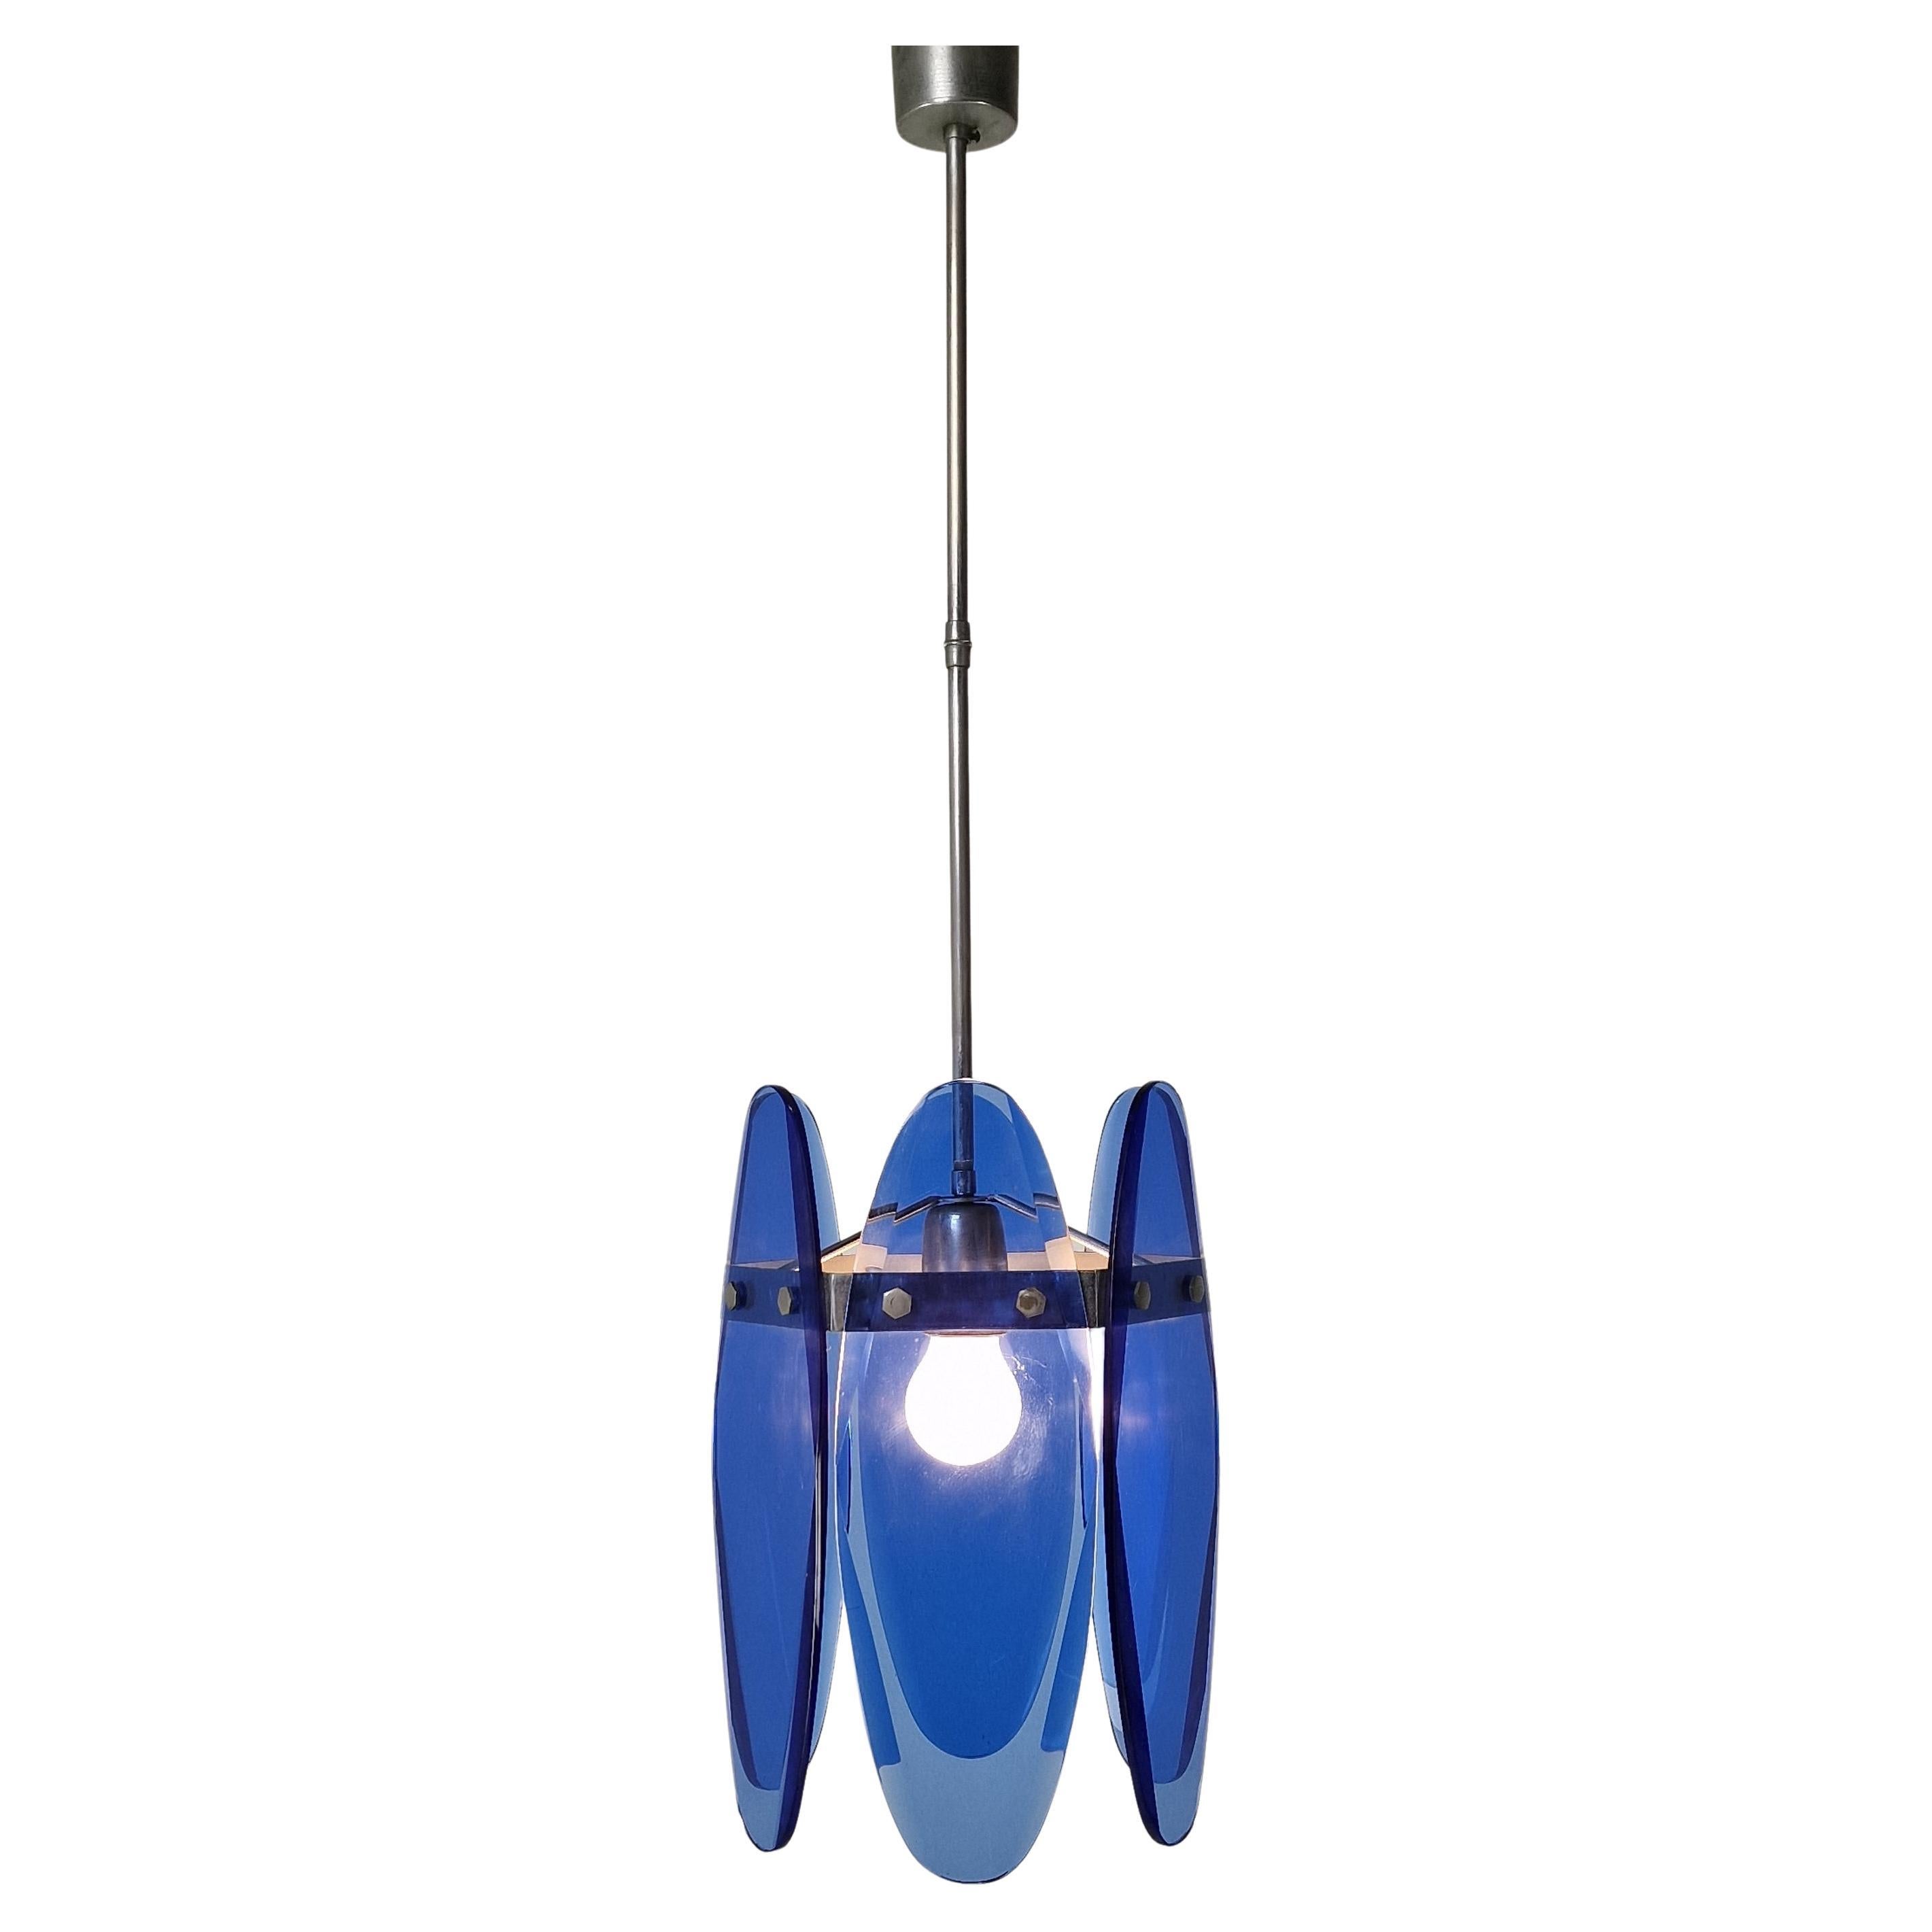 Mid-Century Modern Blue Glass Chandelier or Pendant by Veca, Italy 1970's